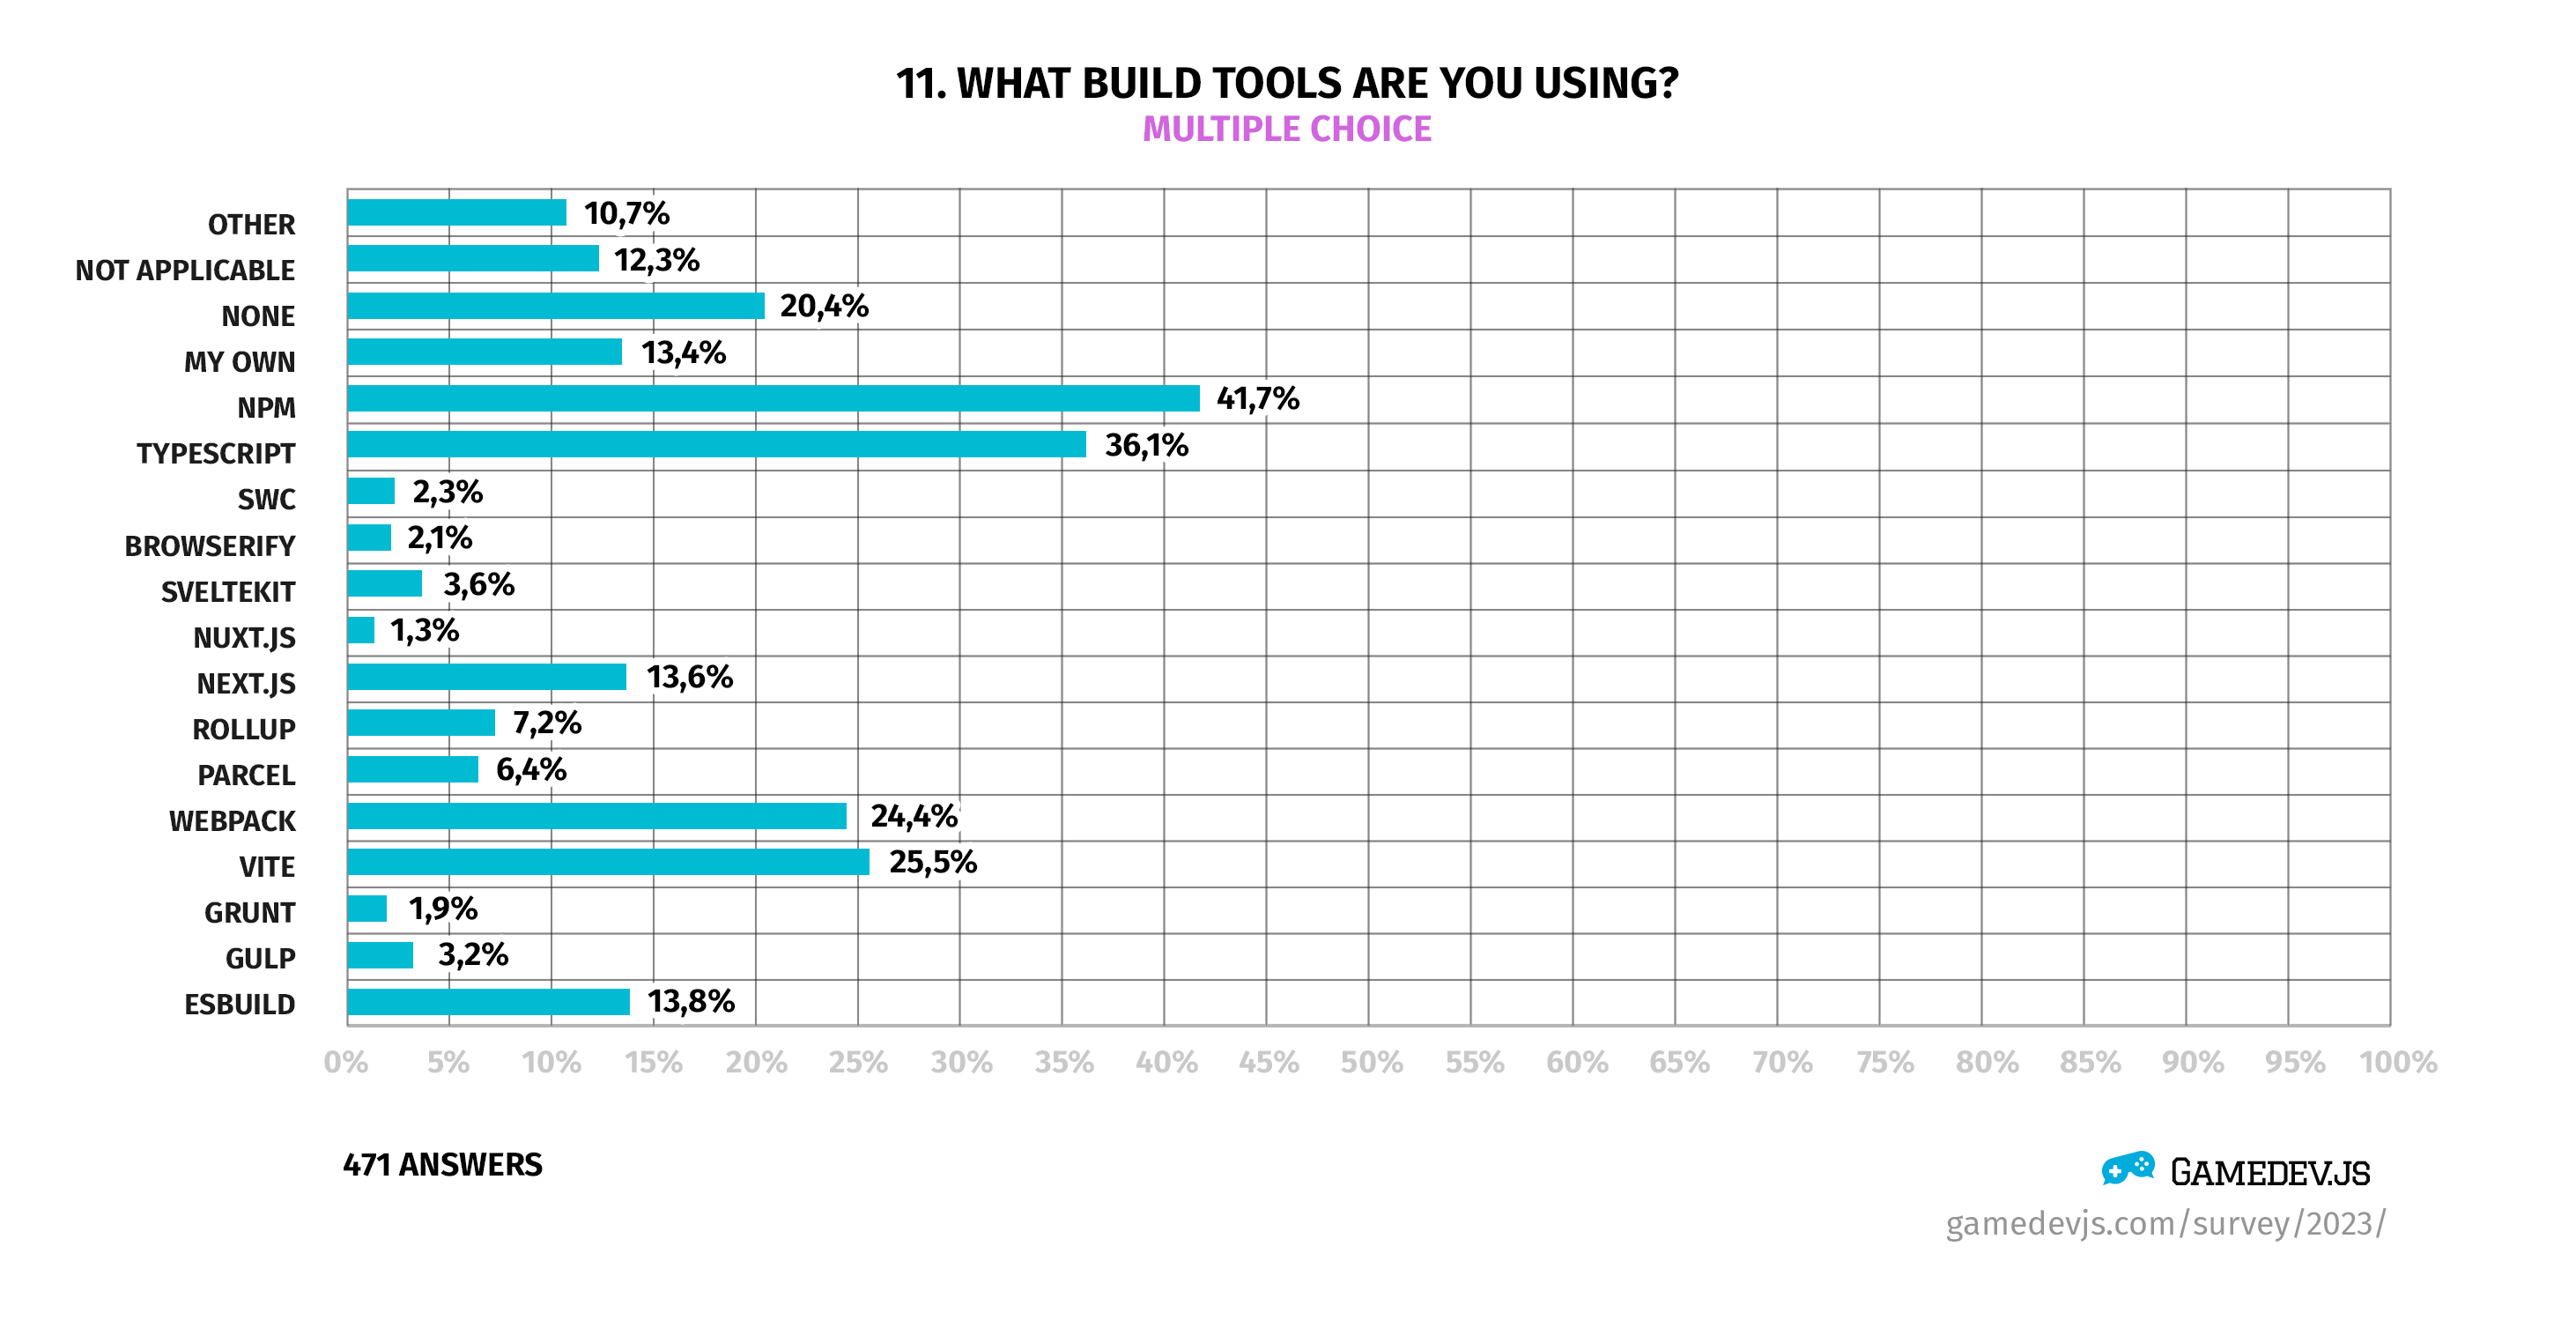 Gamedev.js Survey 2023 - Question #11: What build tools are you using?